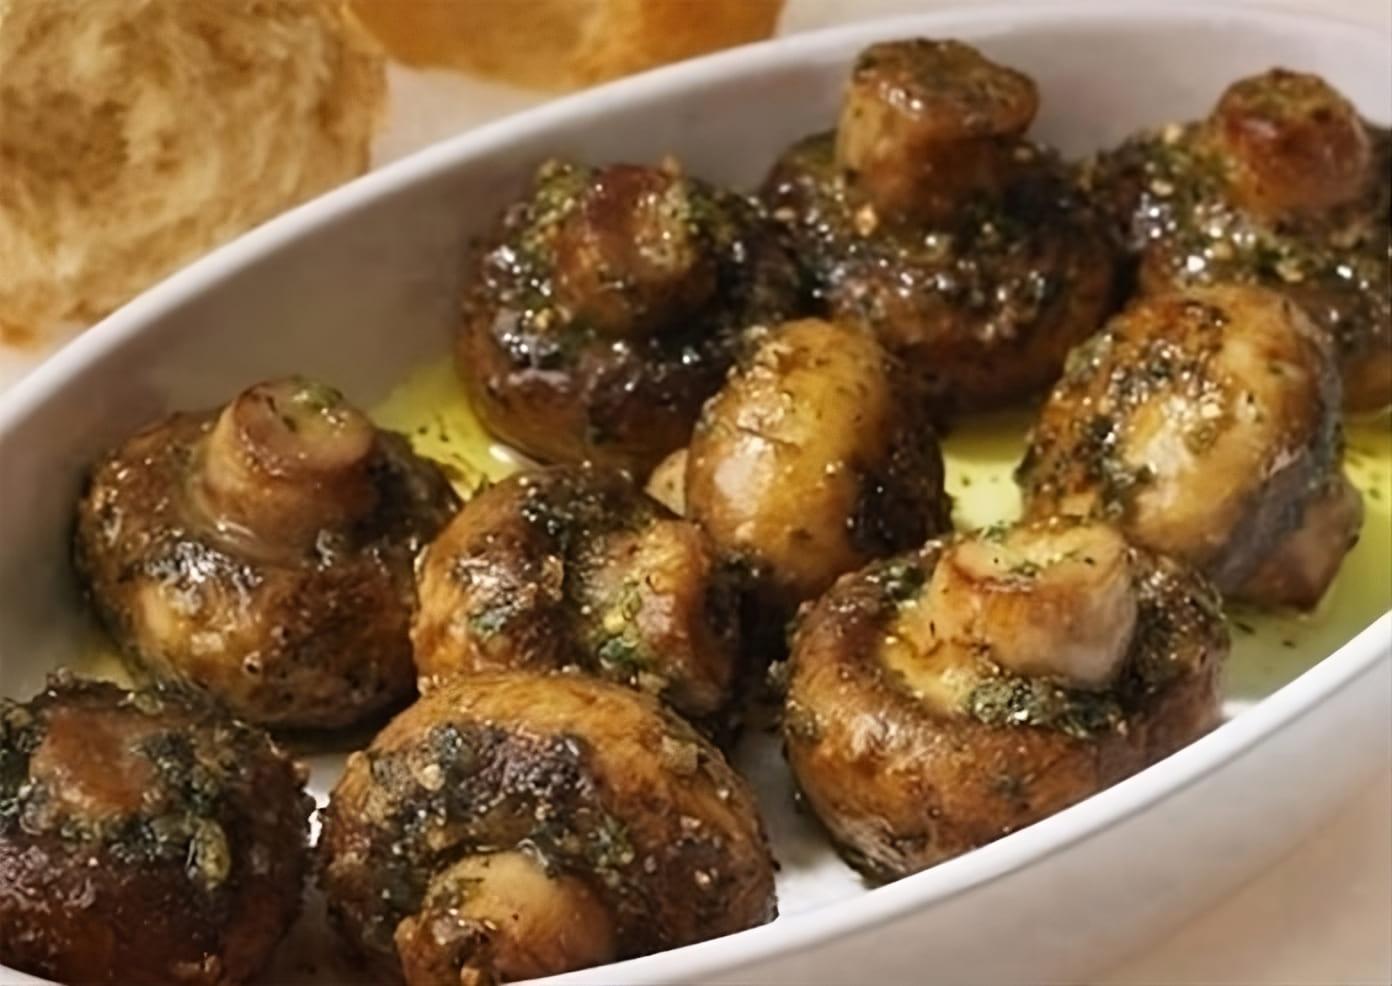 Super All-Time Snack - Baked Mushrooms with Spices